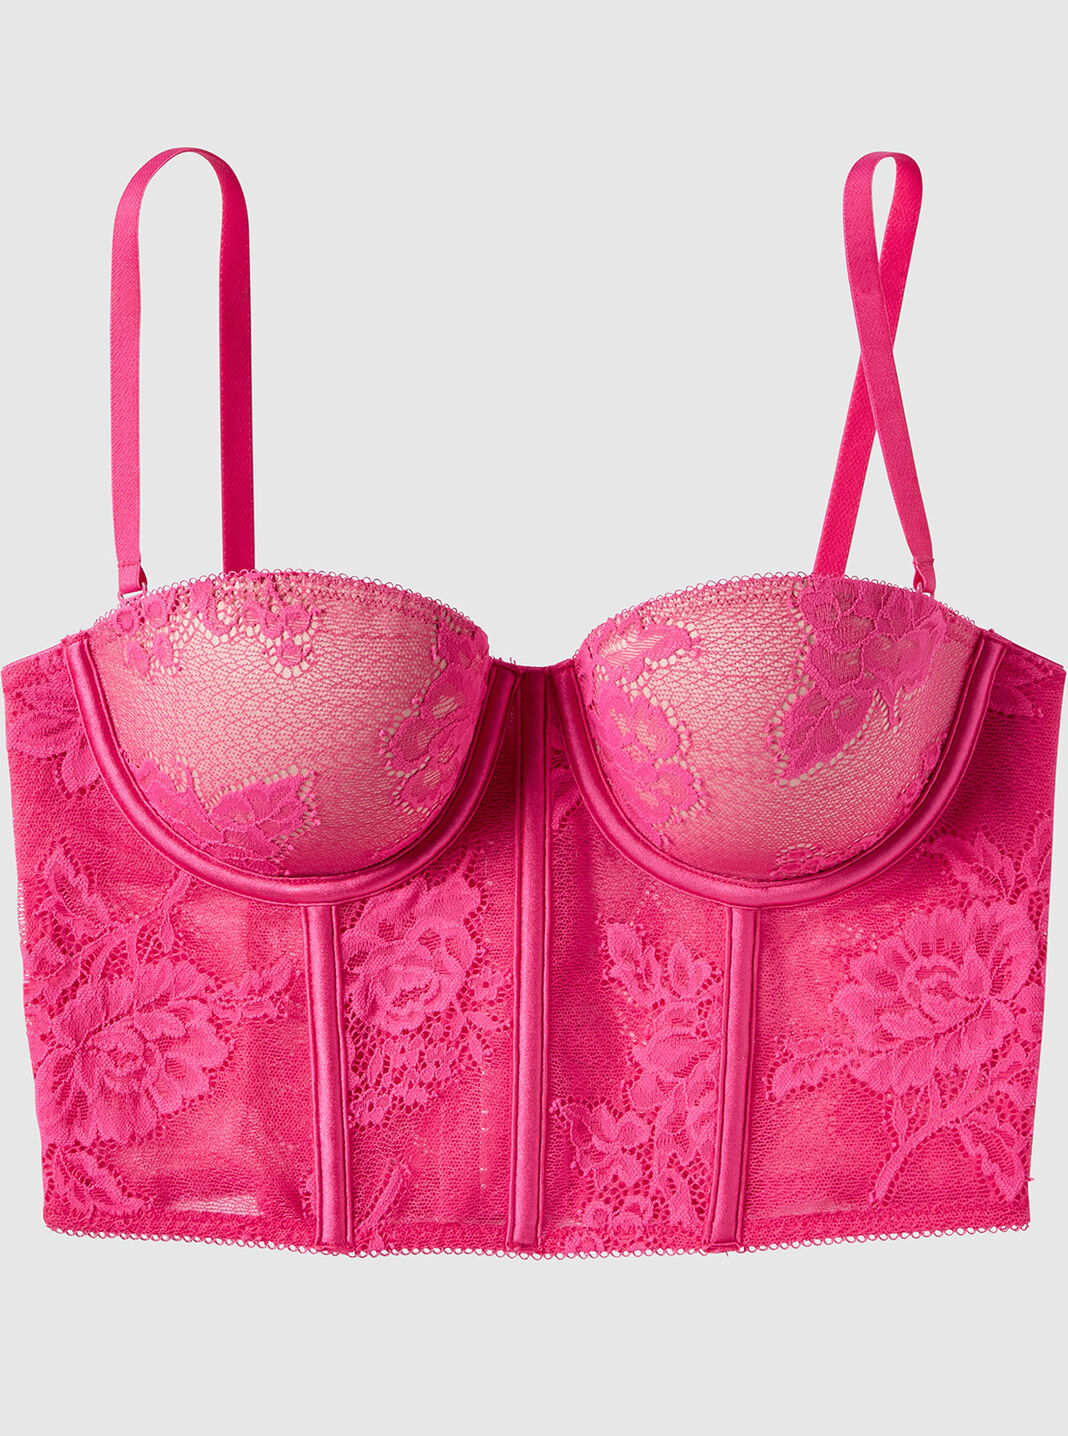 Laura Ashley Bralette Pink - $18 (64% Off Retail) - From Sydney